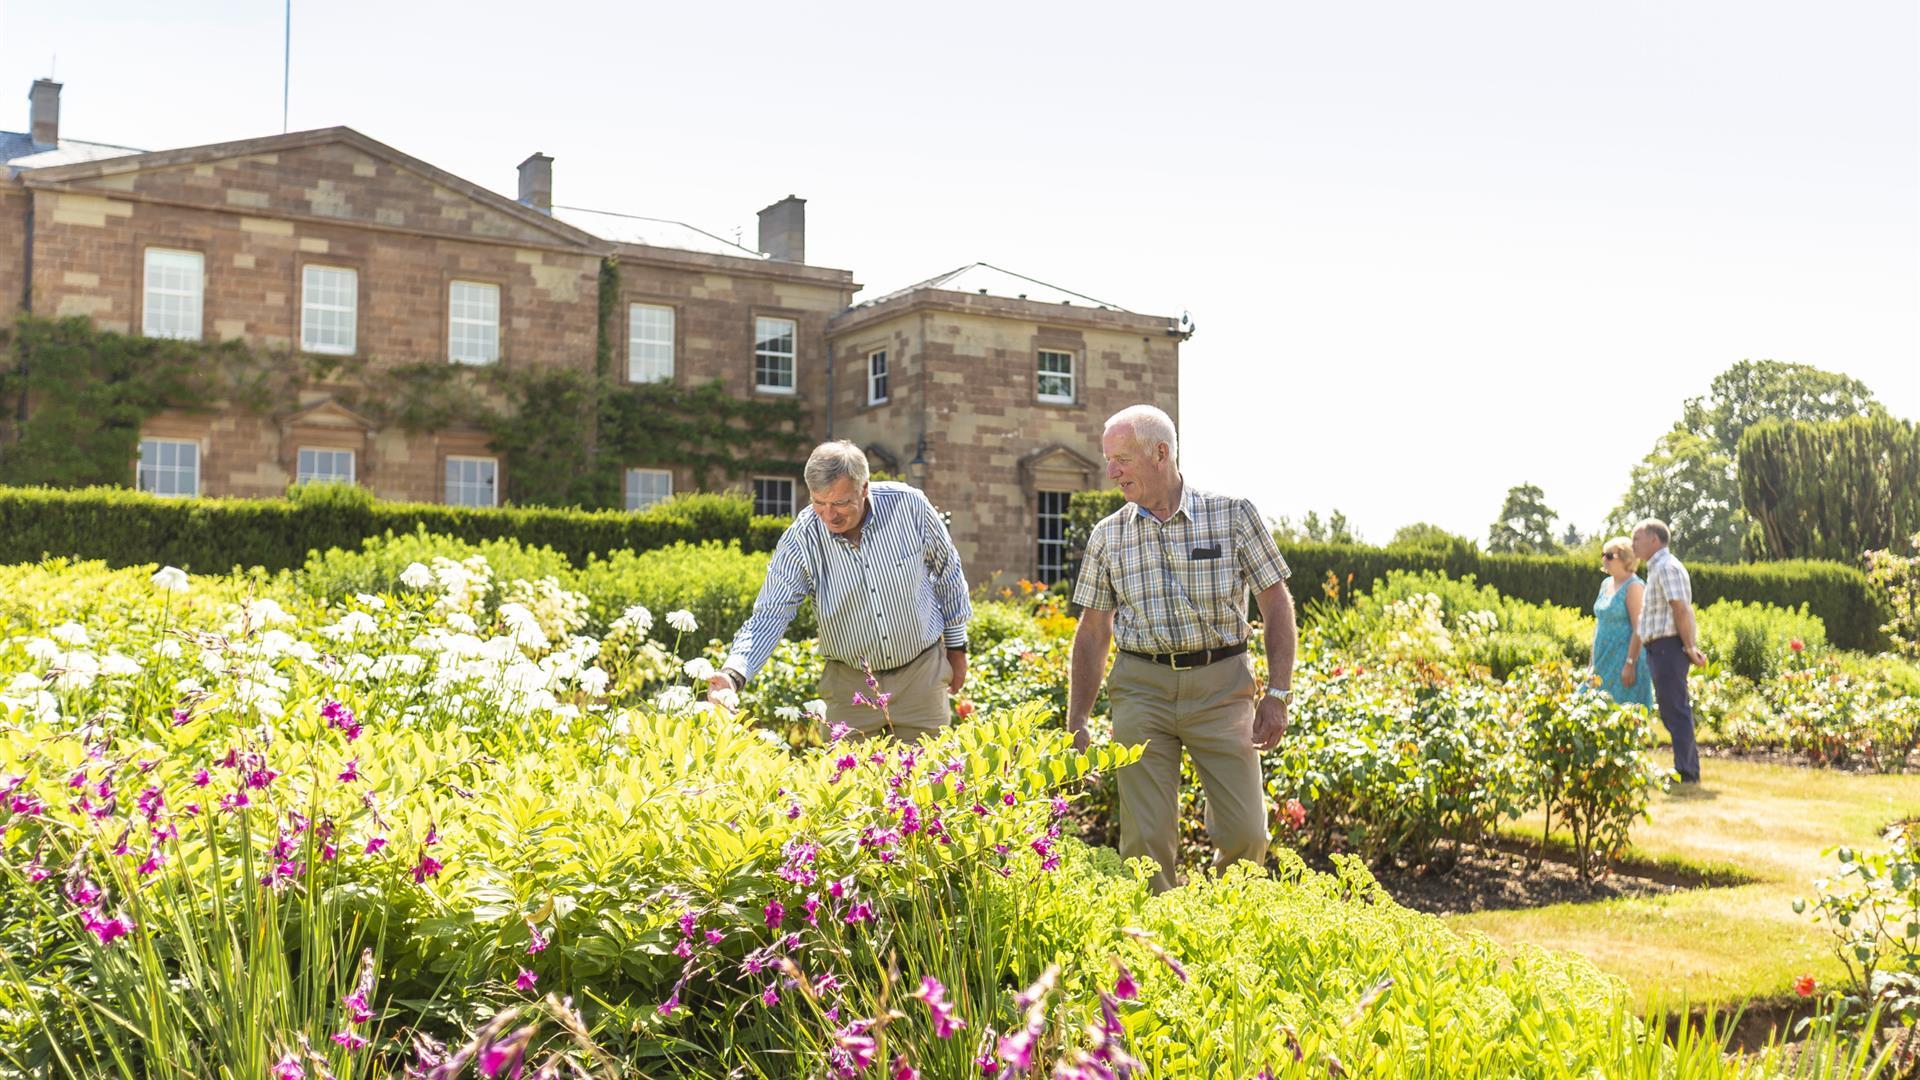 image is of visitors enjoying the gardens and inspecting the flowers and plants with the castle in the background